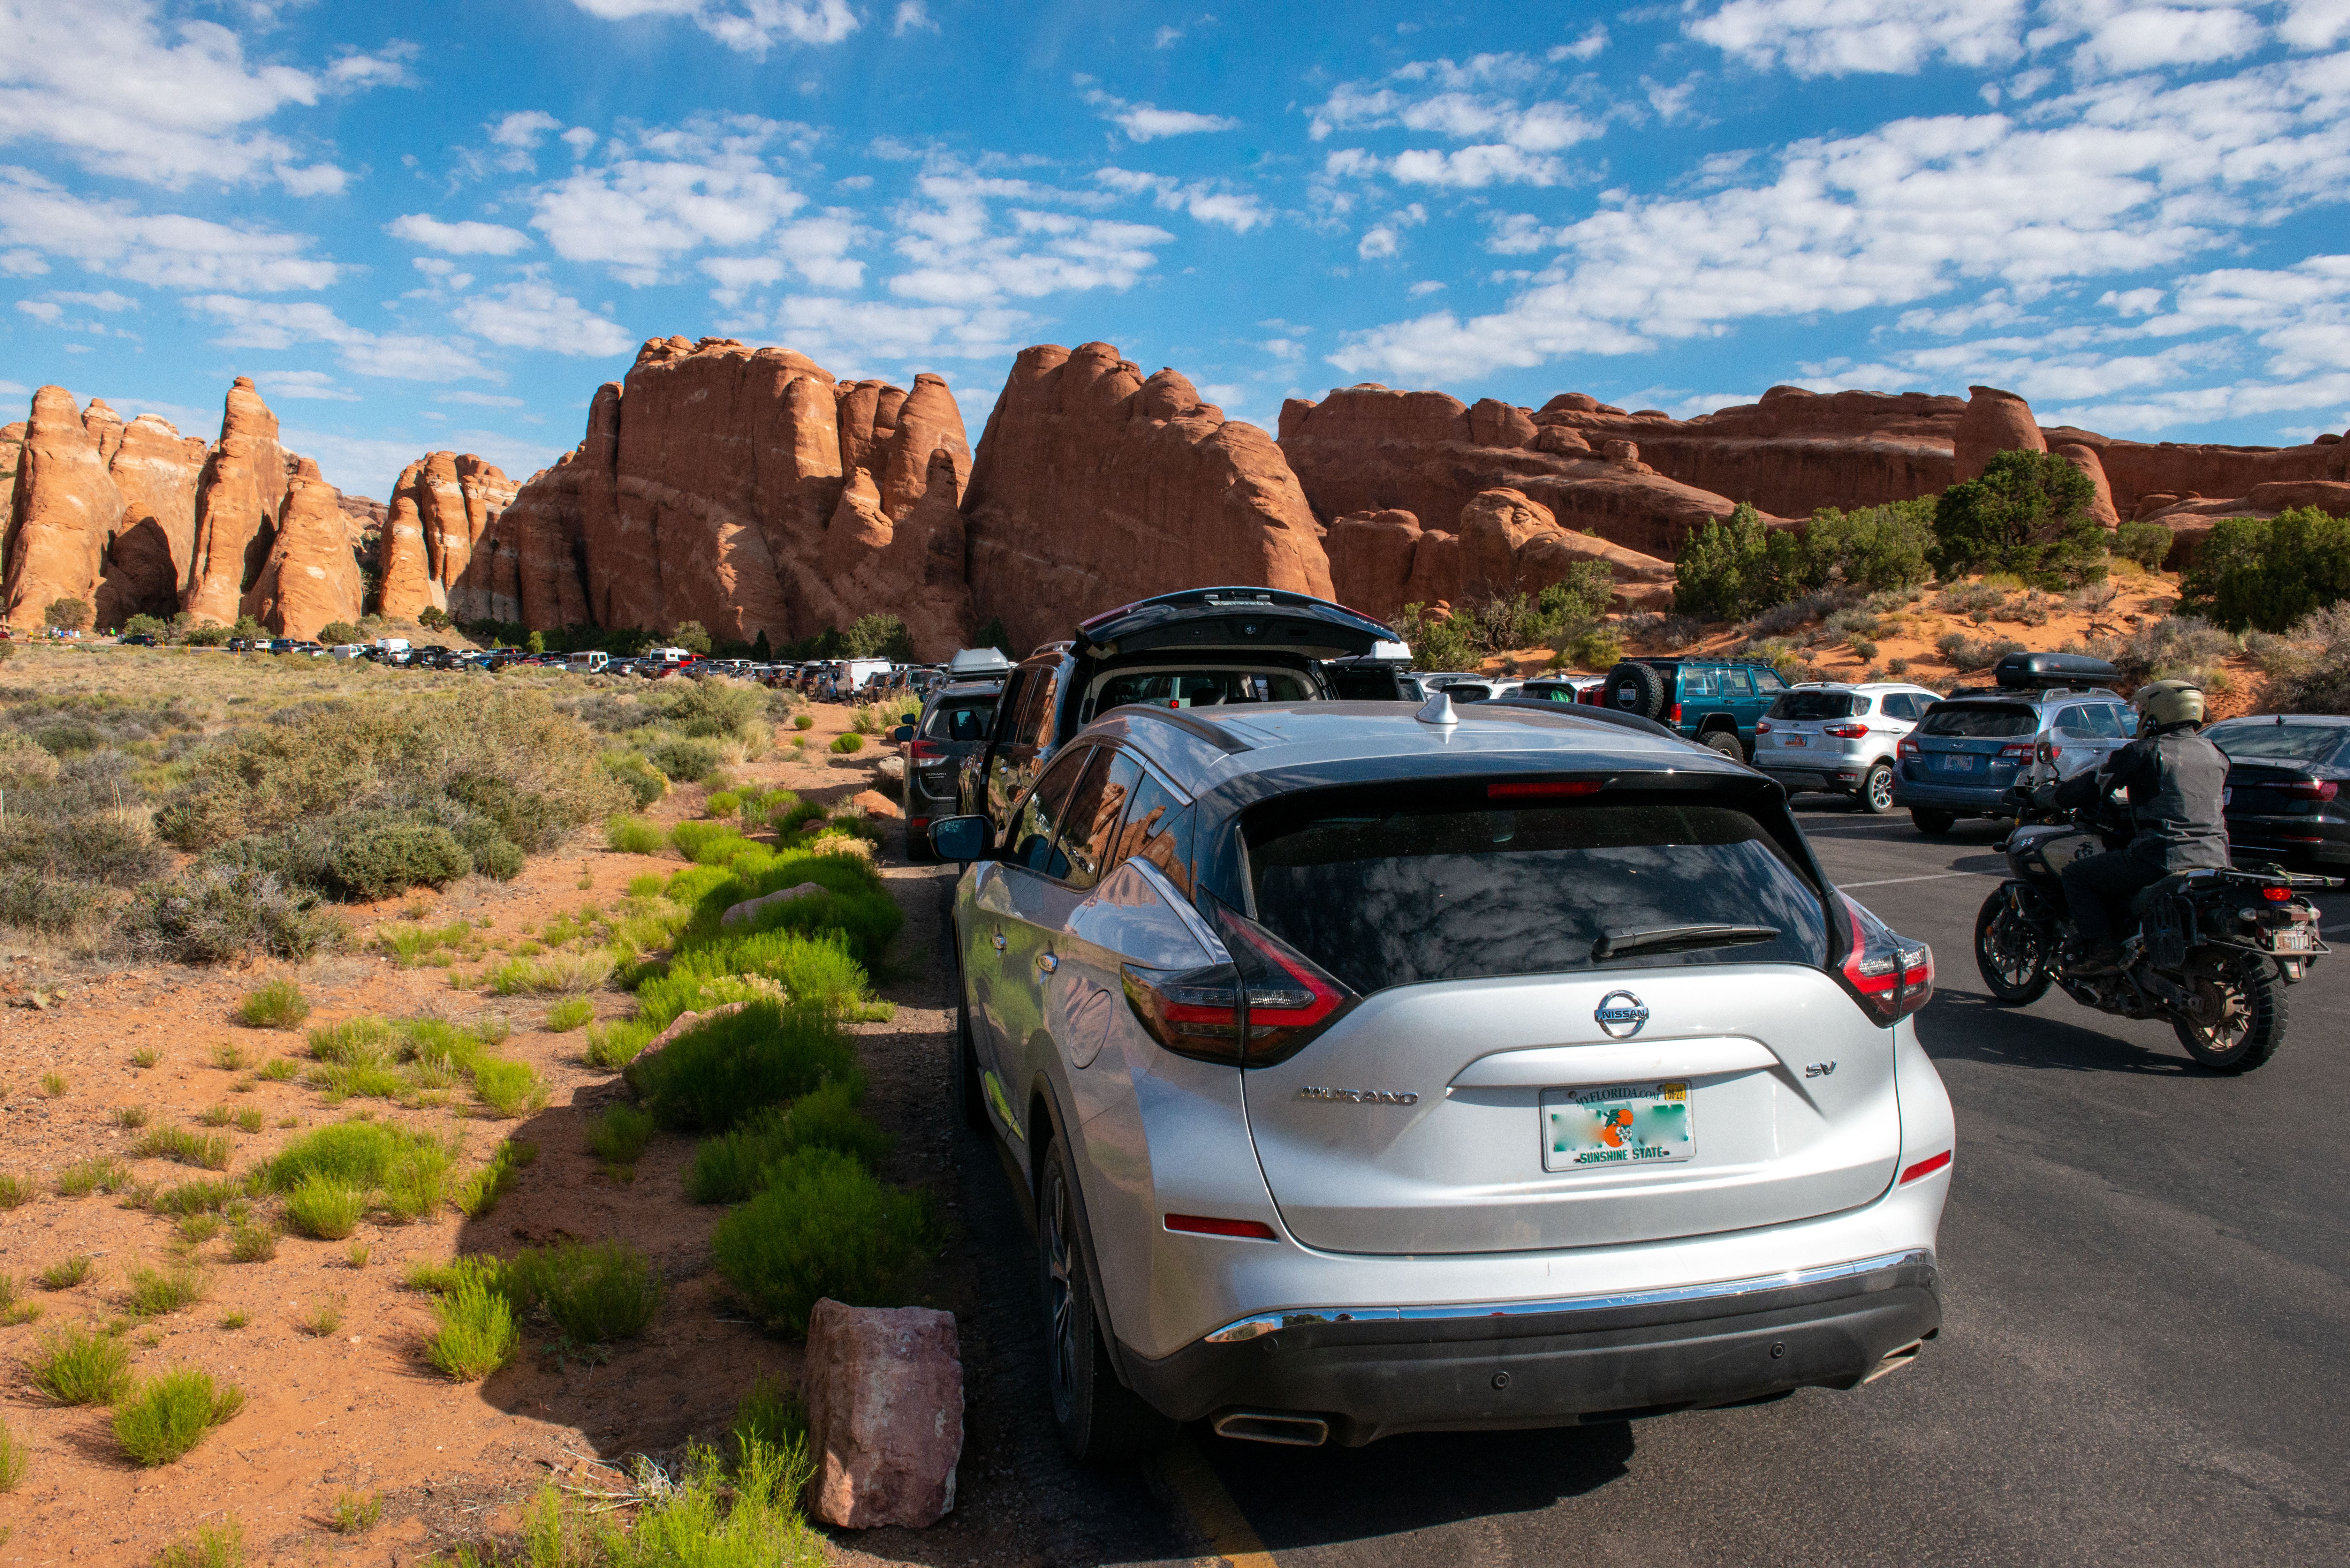 Cars line the parking lot of Devils Garden on a sunny day. A motorcycle passes by. In the background, orange sandstone spires and formations are visible.